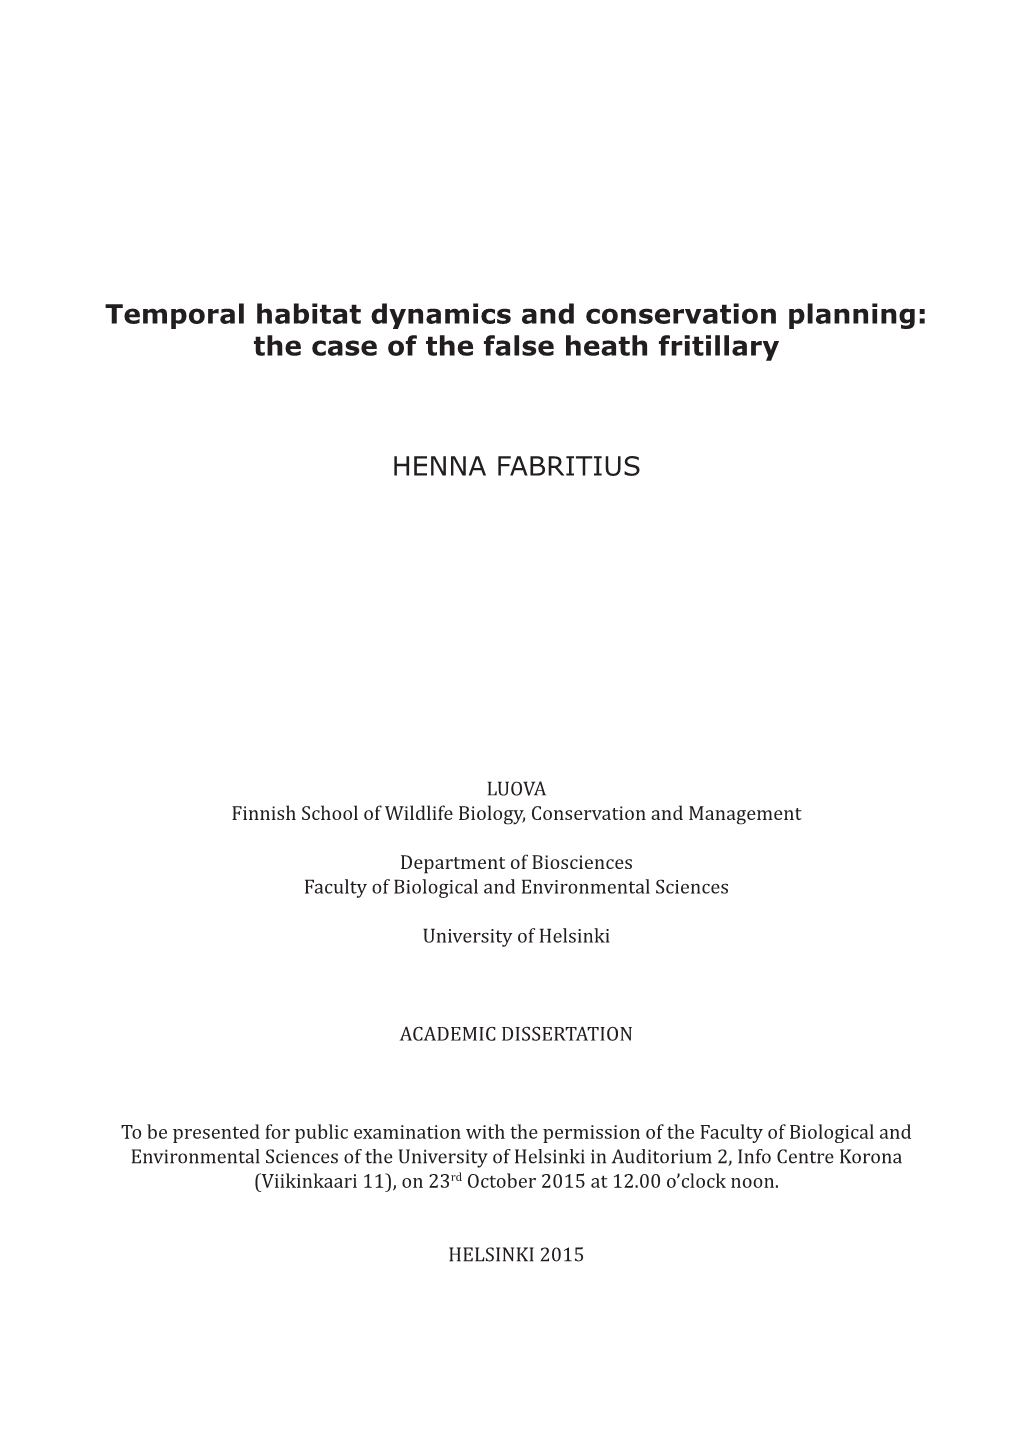 Temporal Habitat Dynamics and Conservation Planning: the Case of the False Heath Fritillary